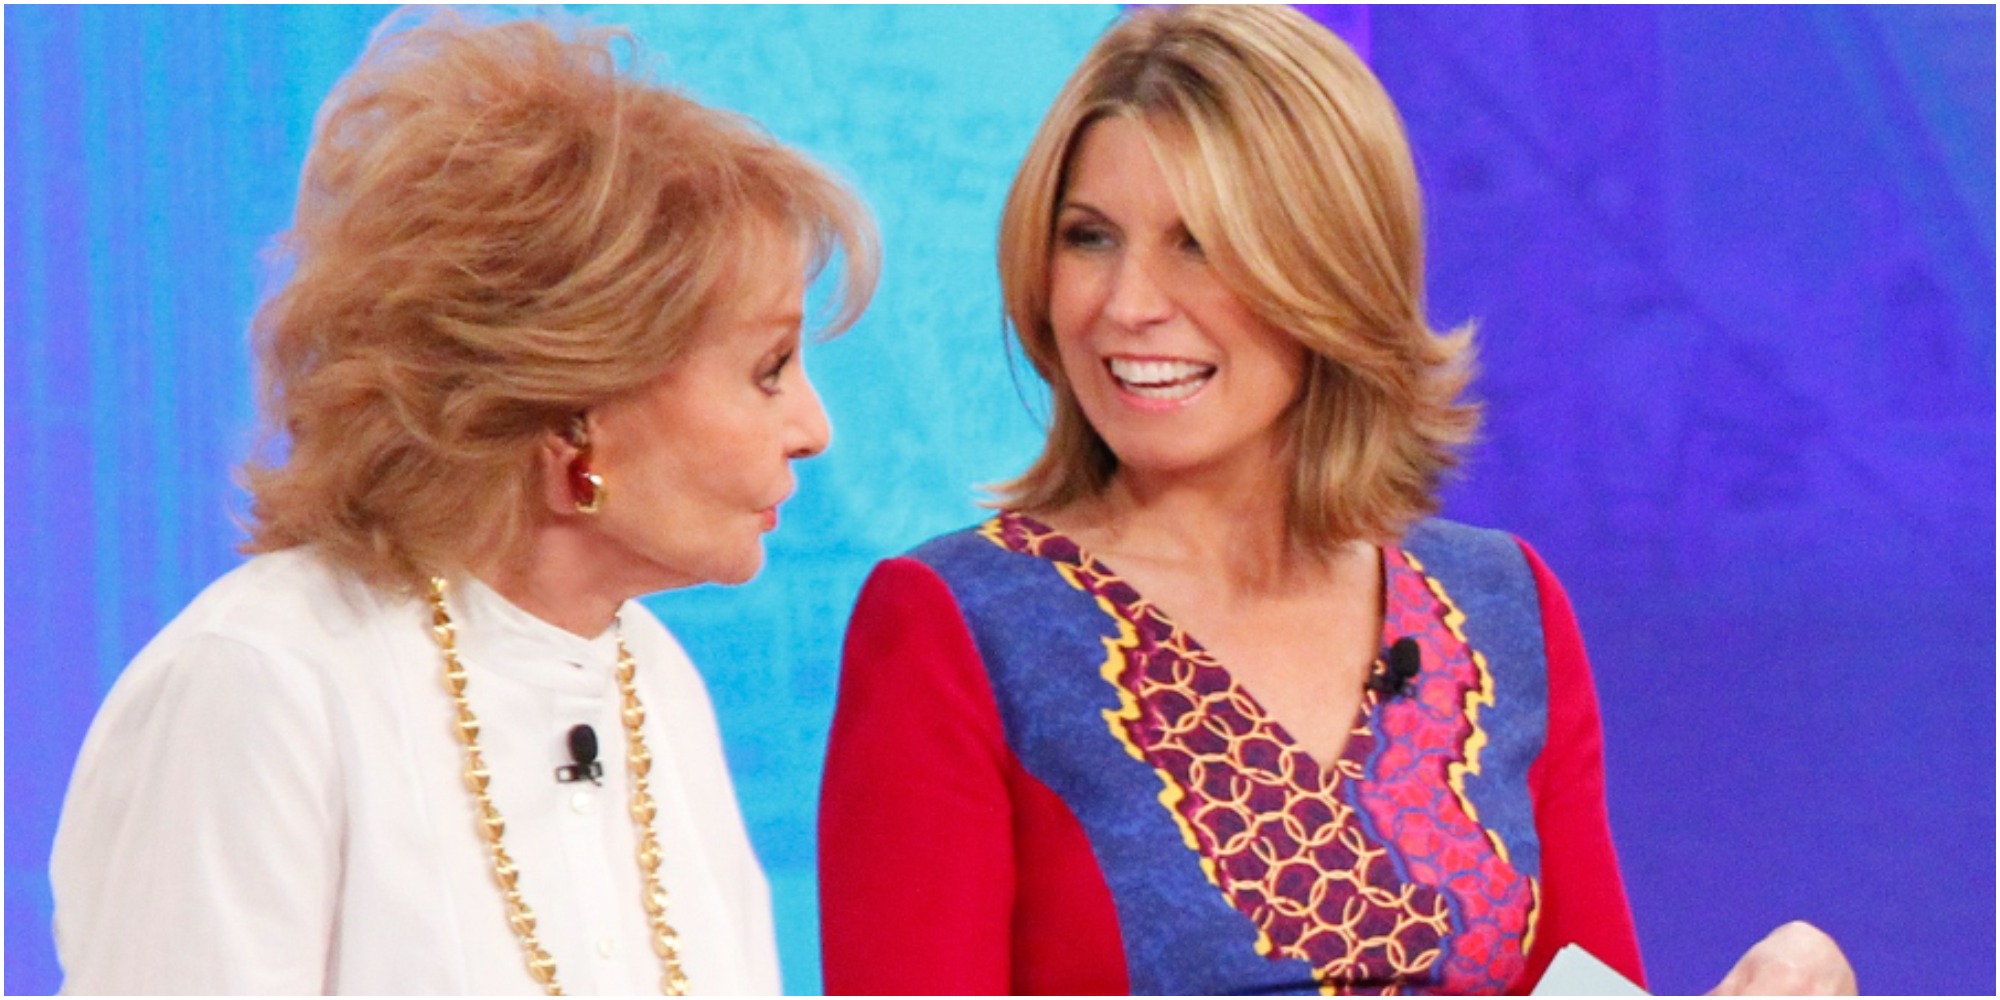 Barbara Walters and Nicolle Wallace on the set of " The View."